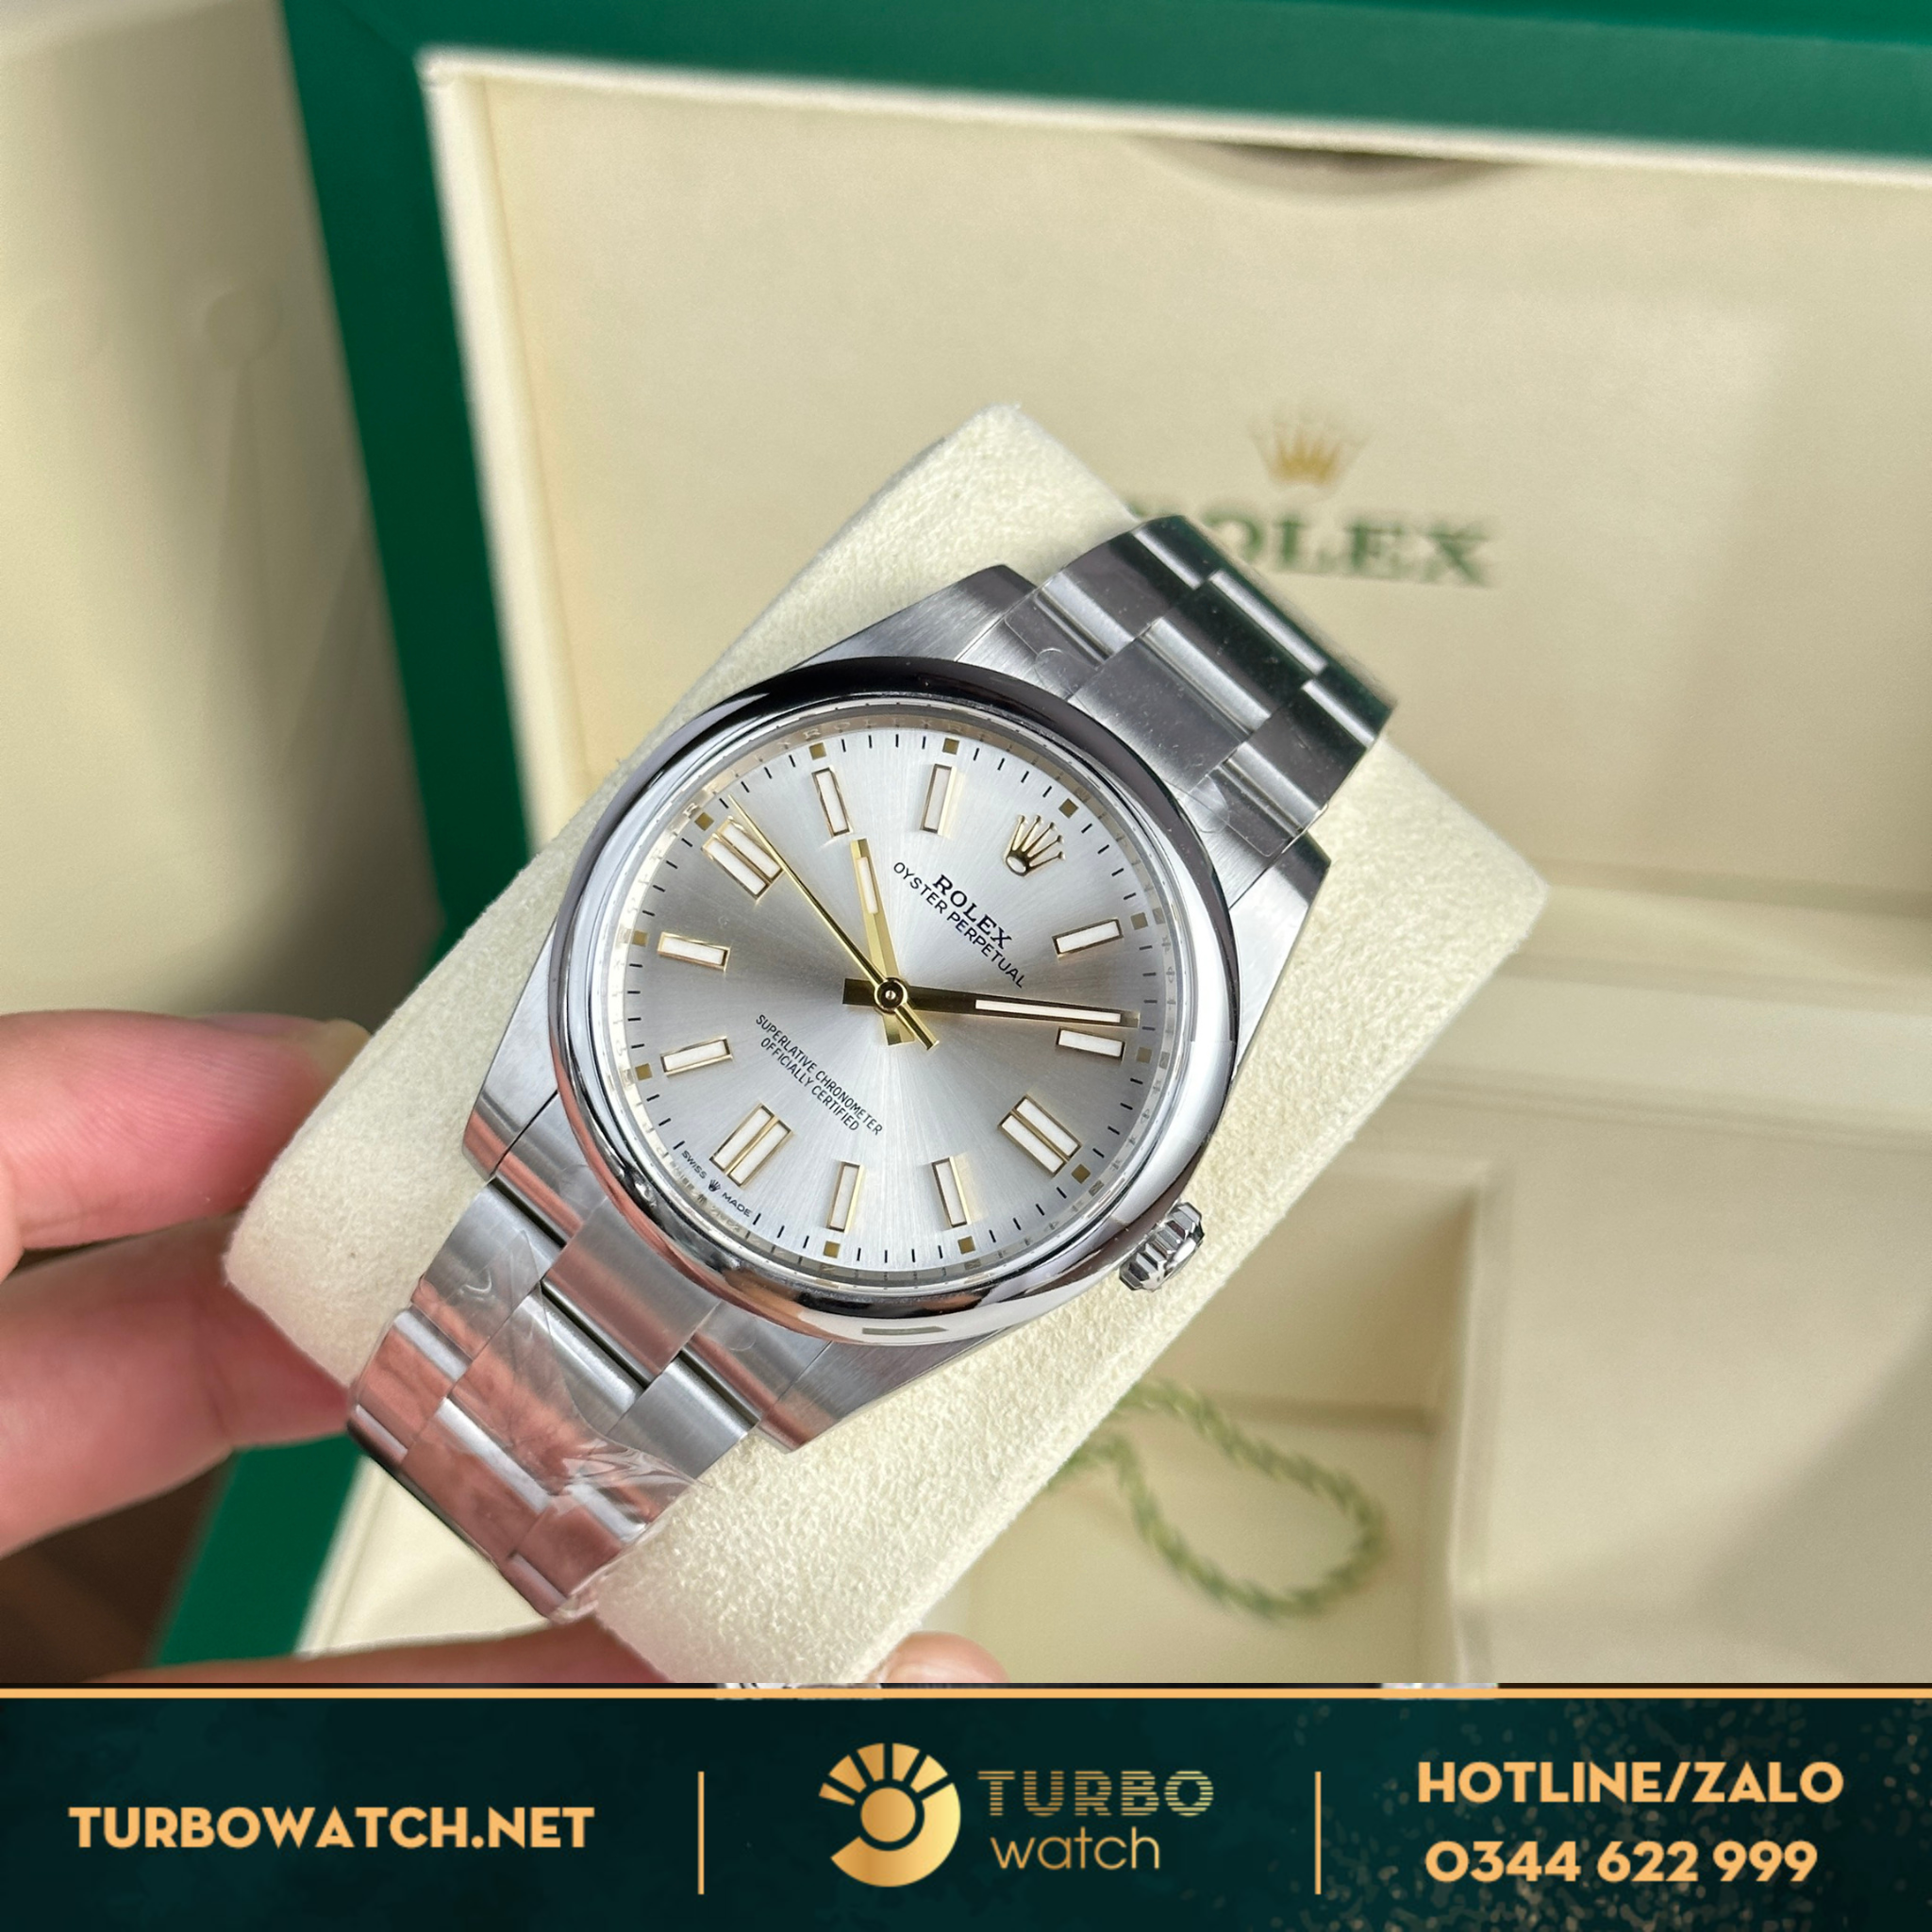 Đồng hồ Rolex Oyster Perpetual 124300 fake 1:1